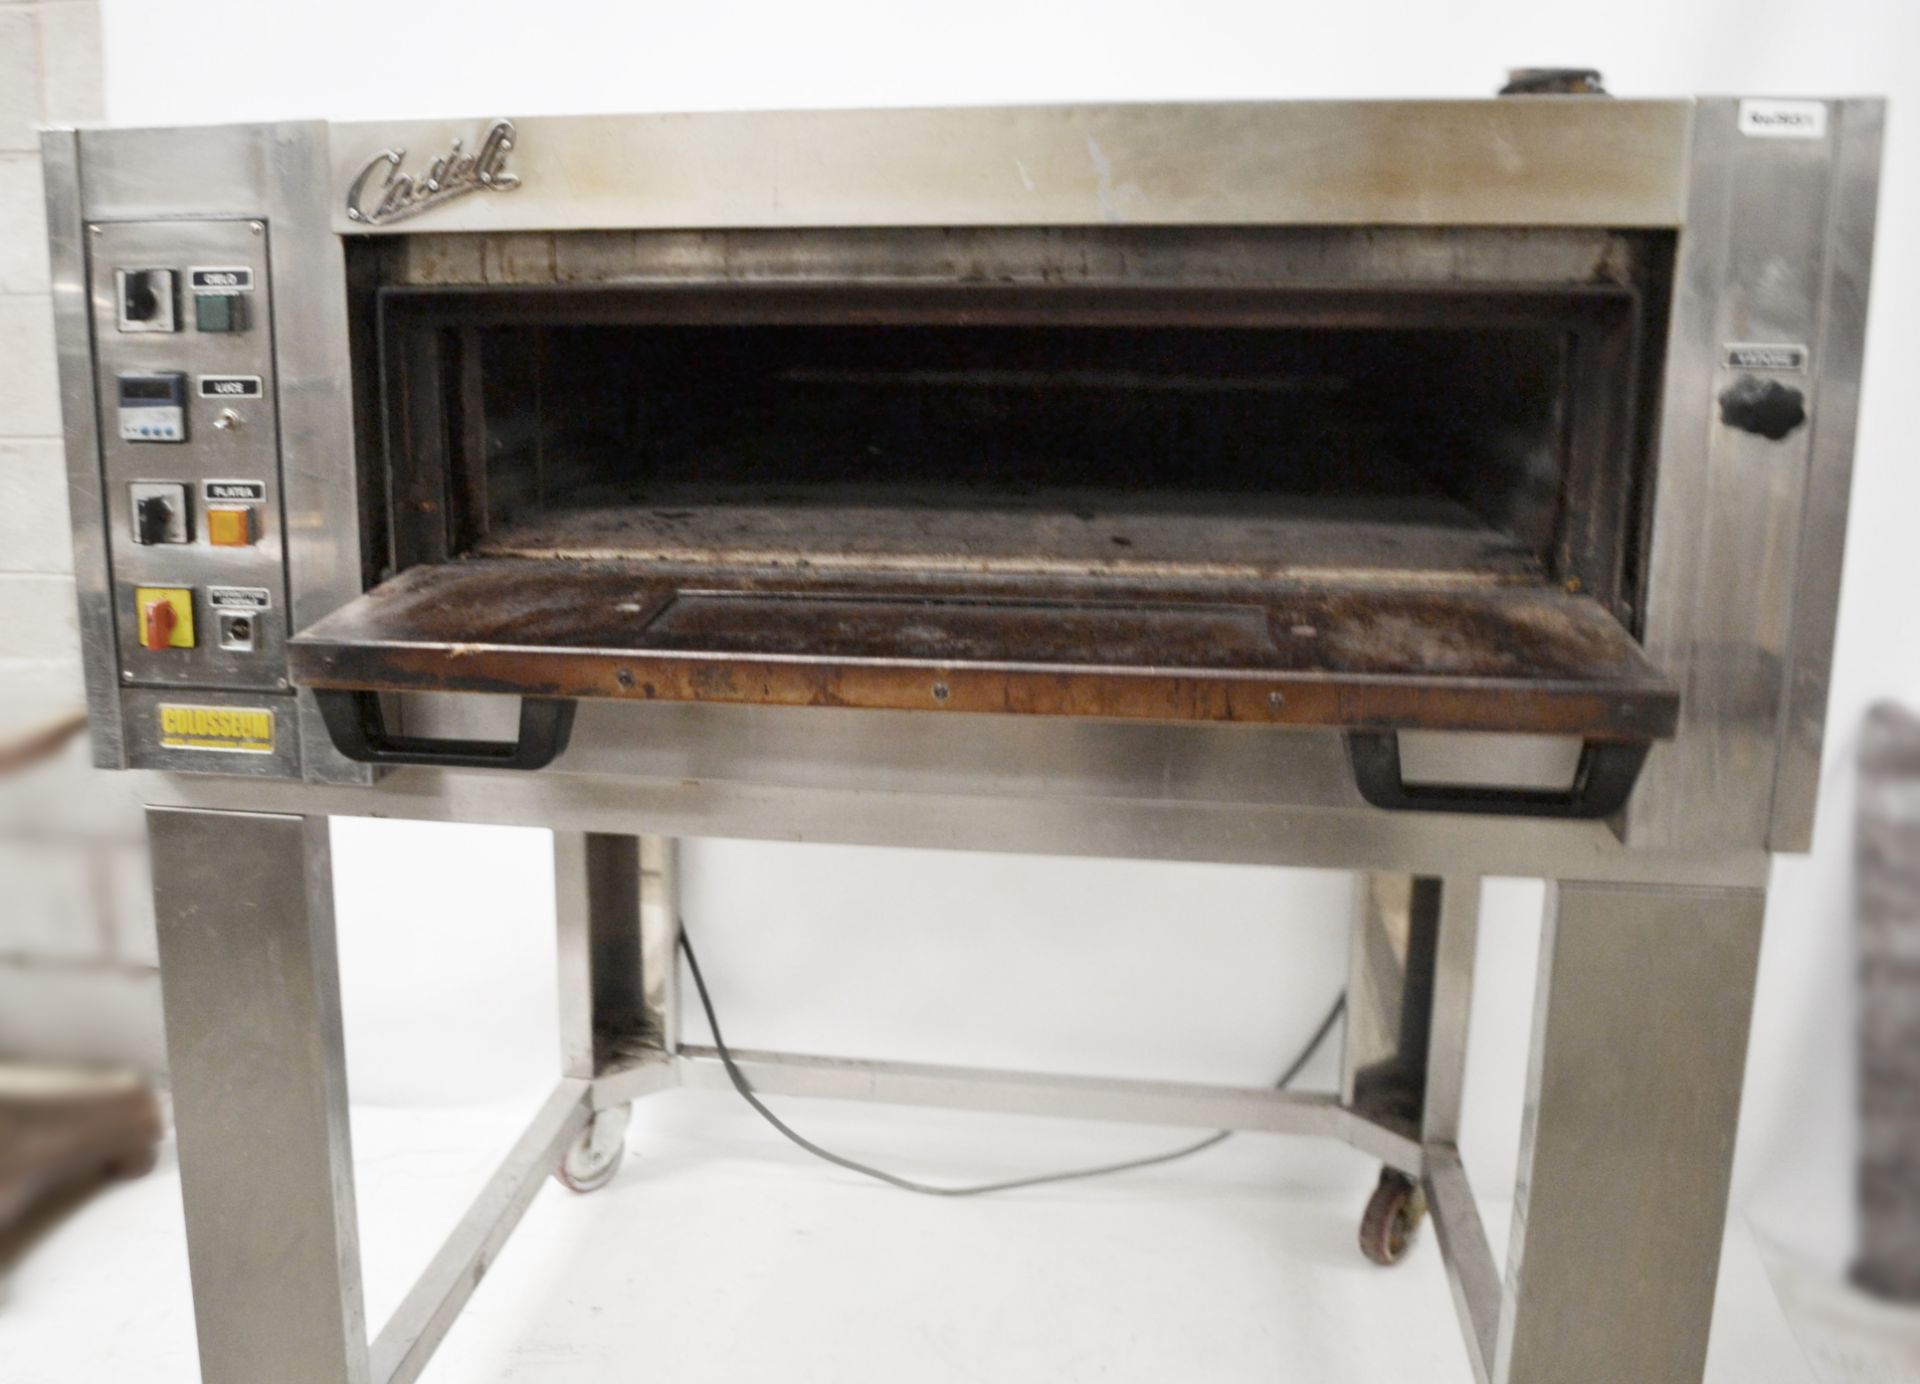 1 x Castelli Forni 'SUPER PIZZA' Commercial Pizza Oven And Stand With Castors - Image 2 of 9